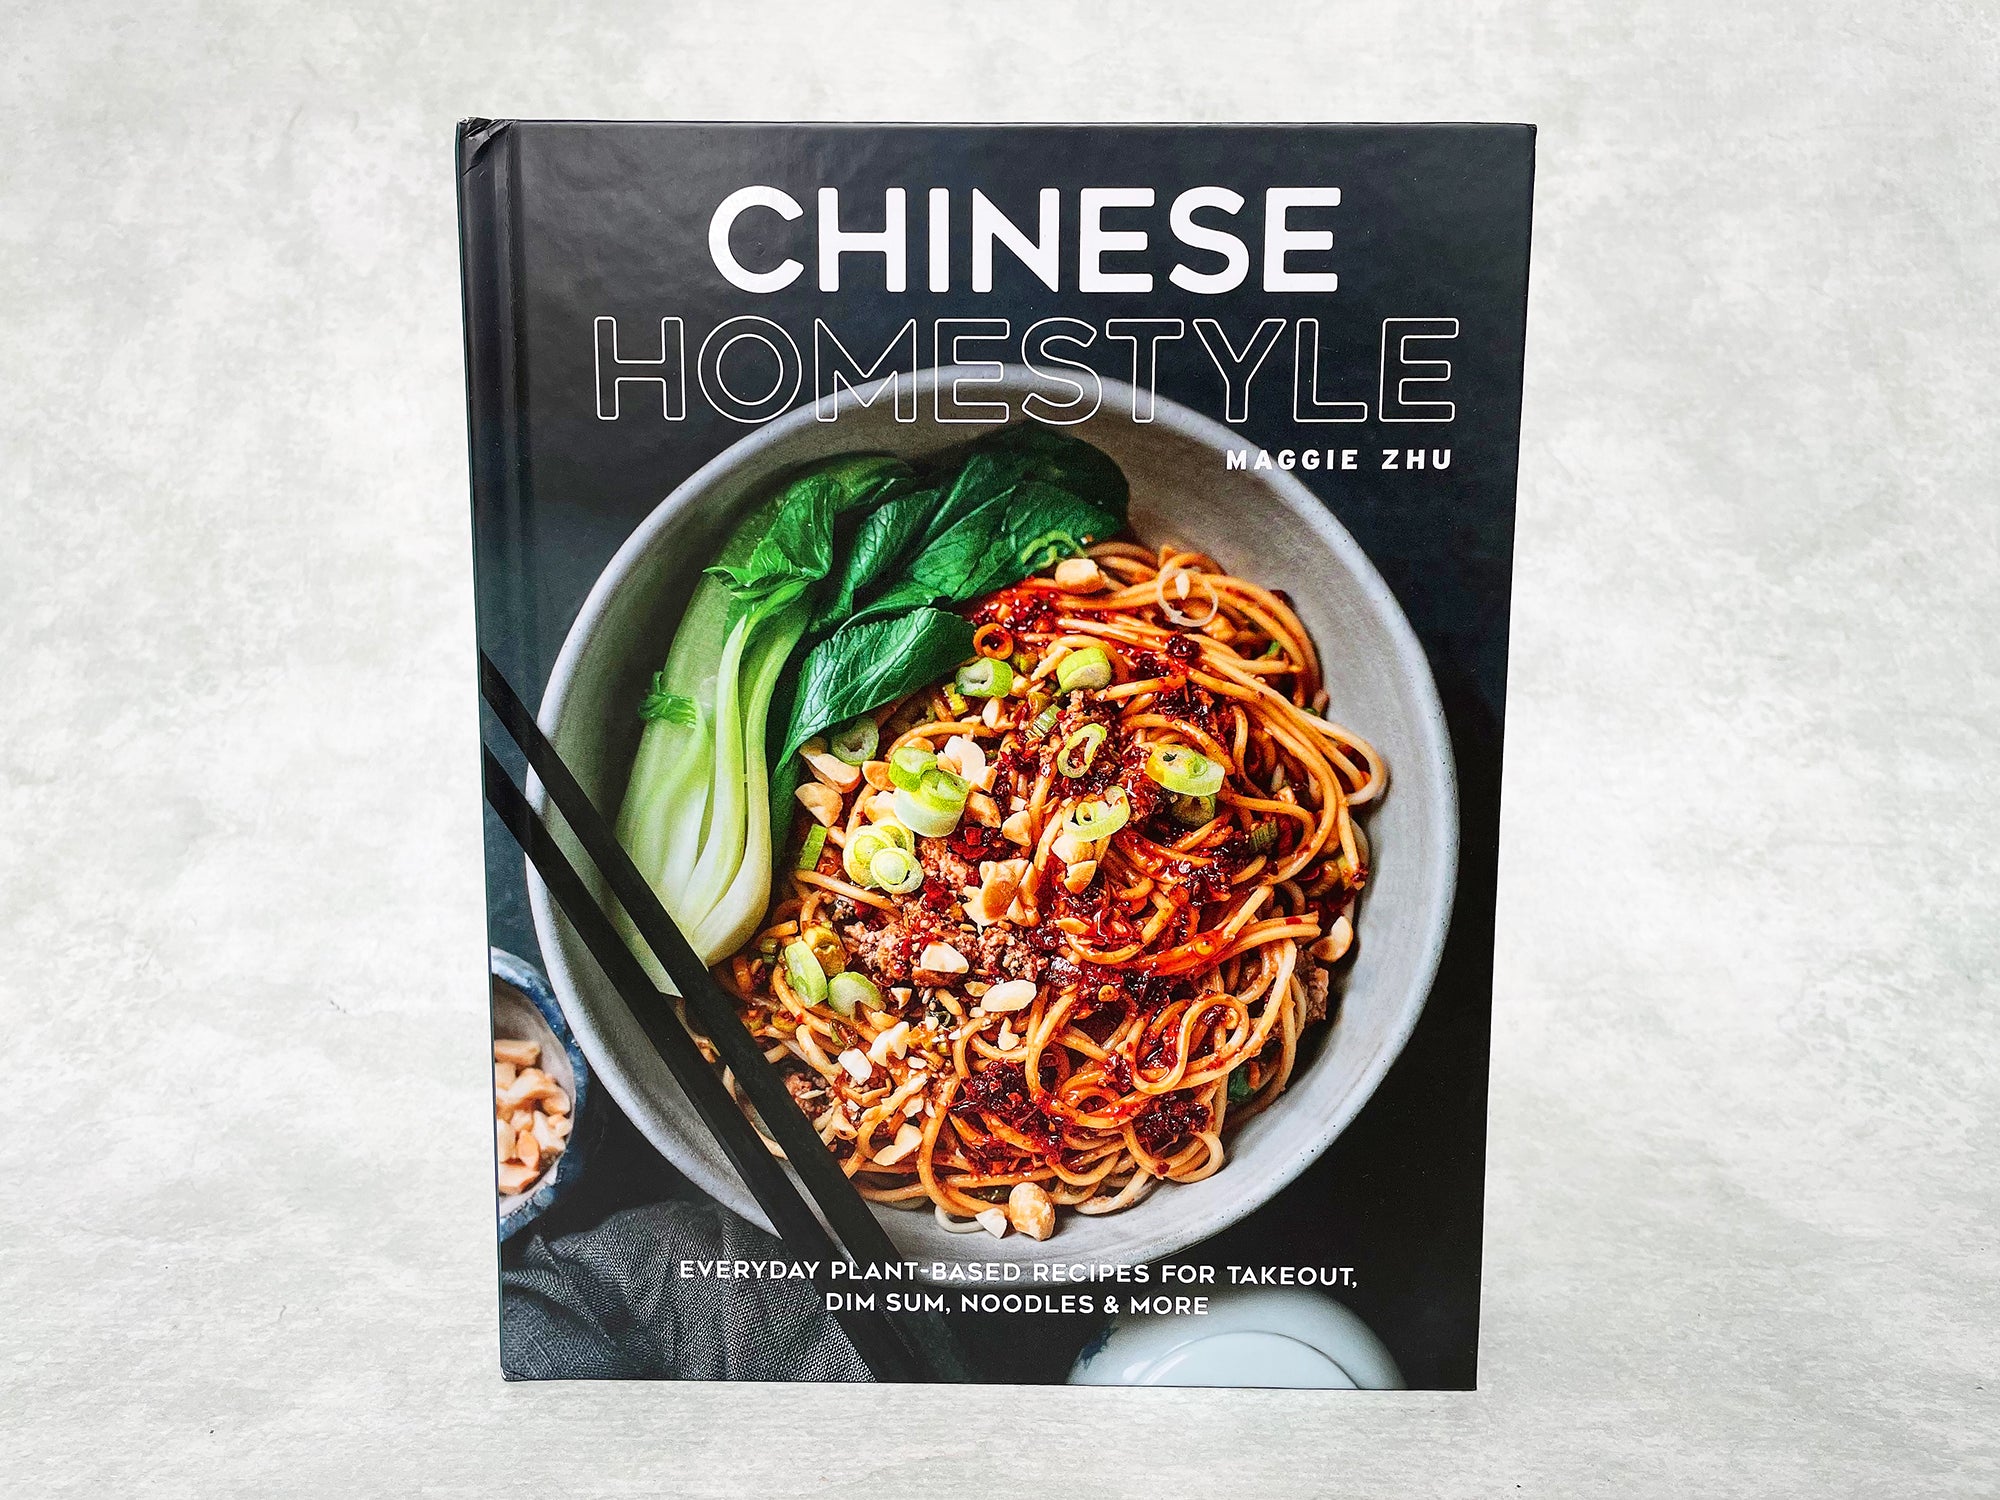 Chinese Homestyle cookbook